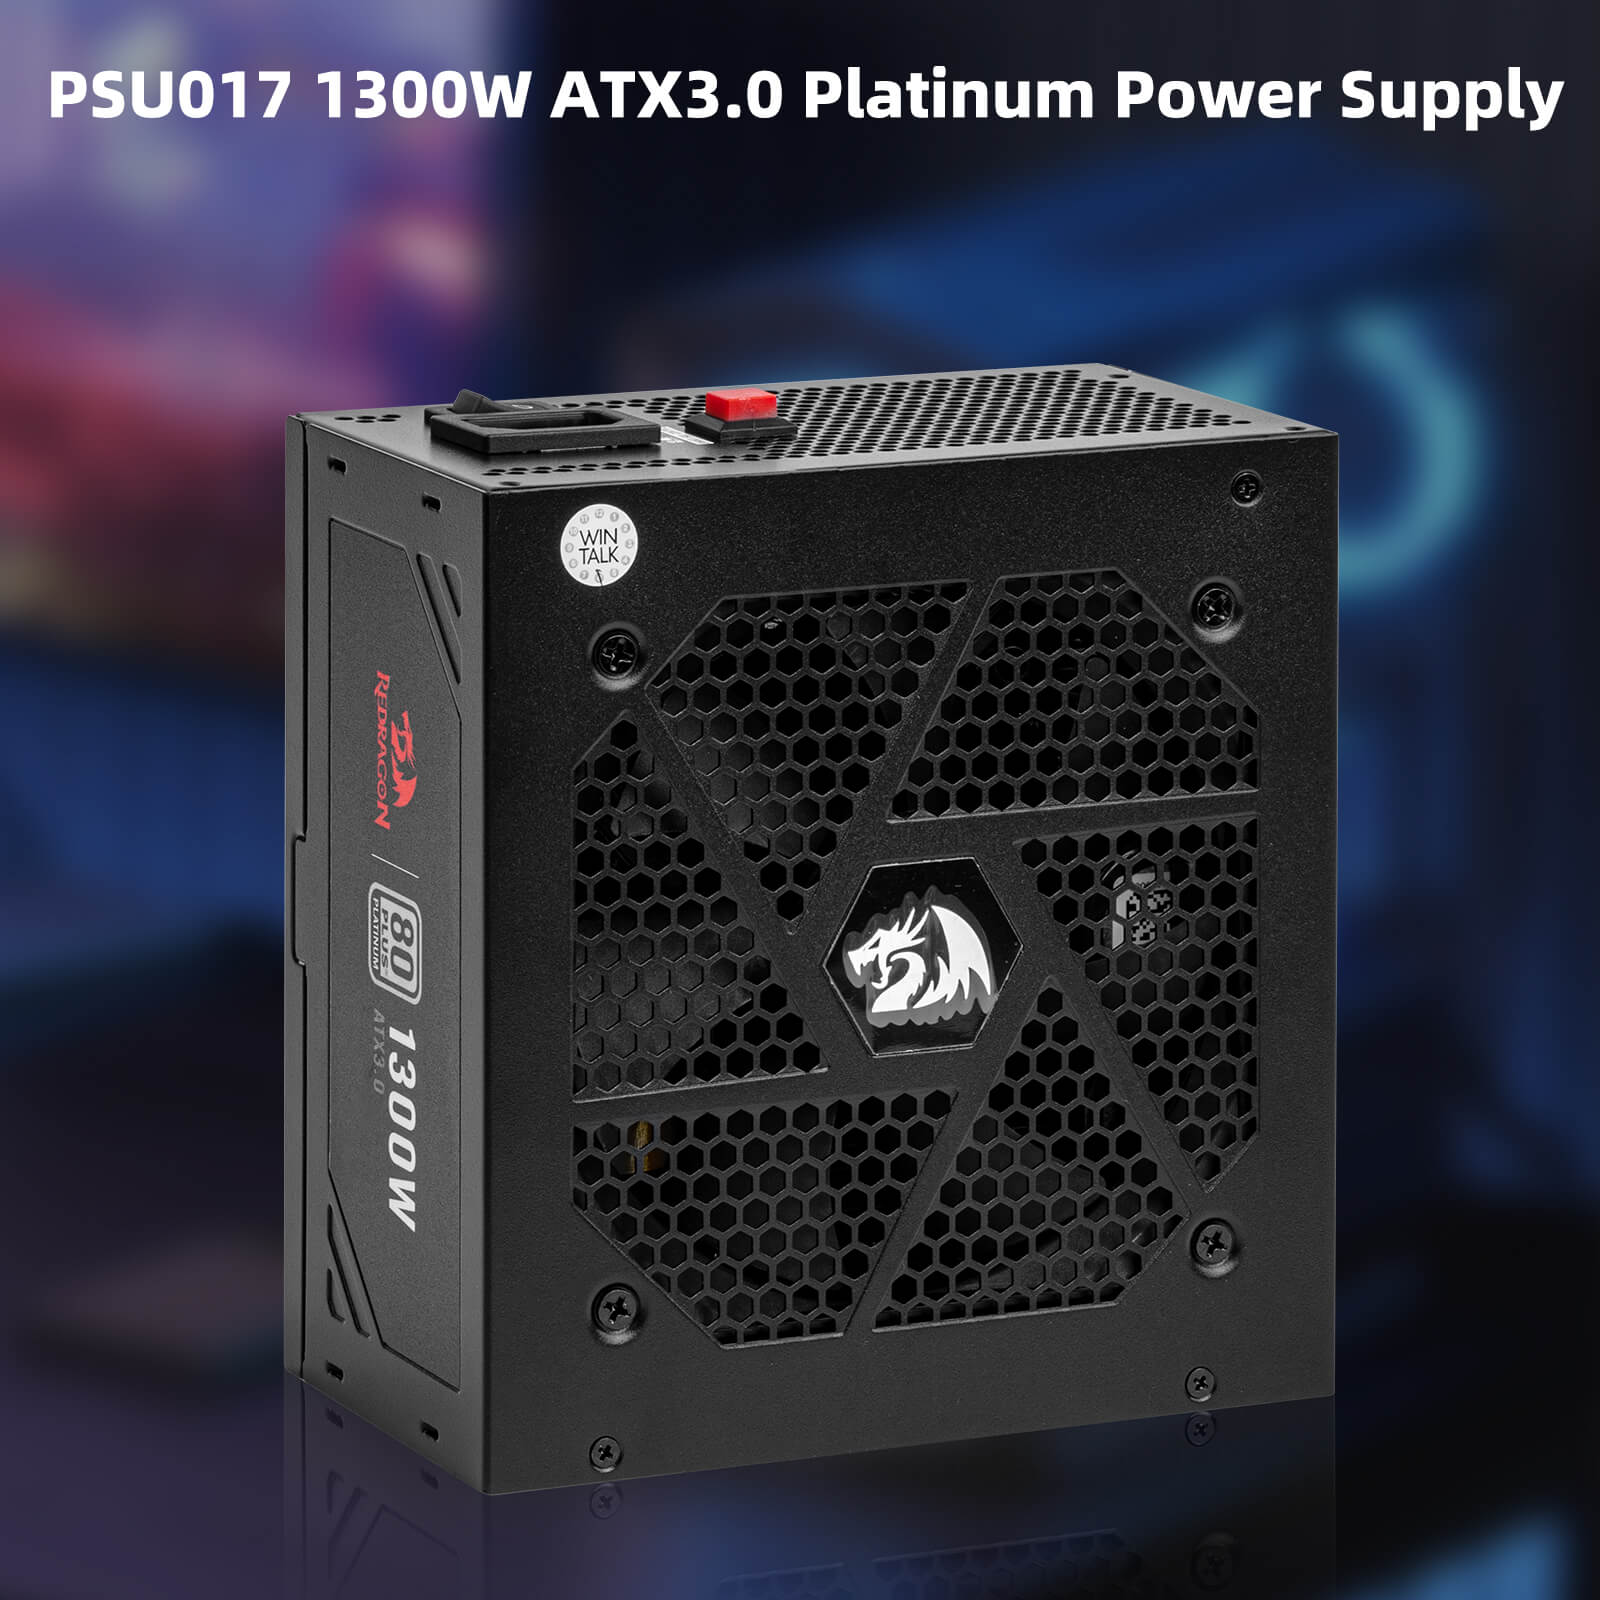 Do You Need A New Power Supply? - ATX 3.0 